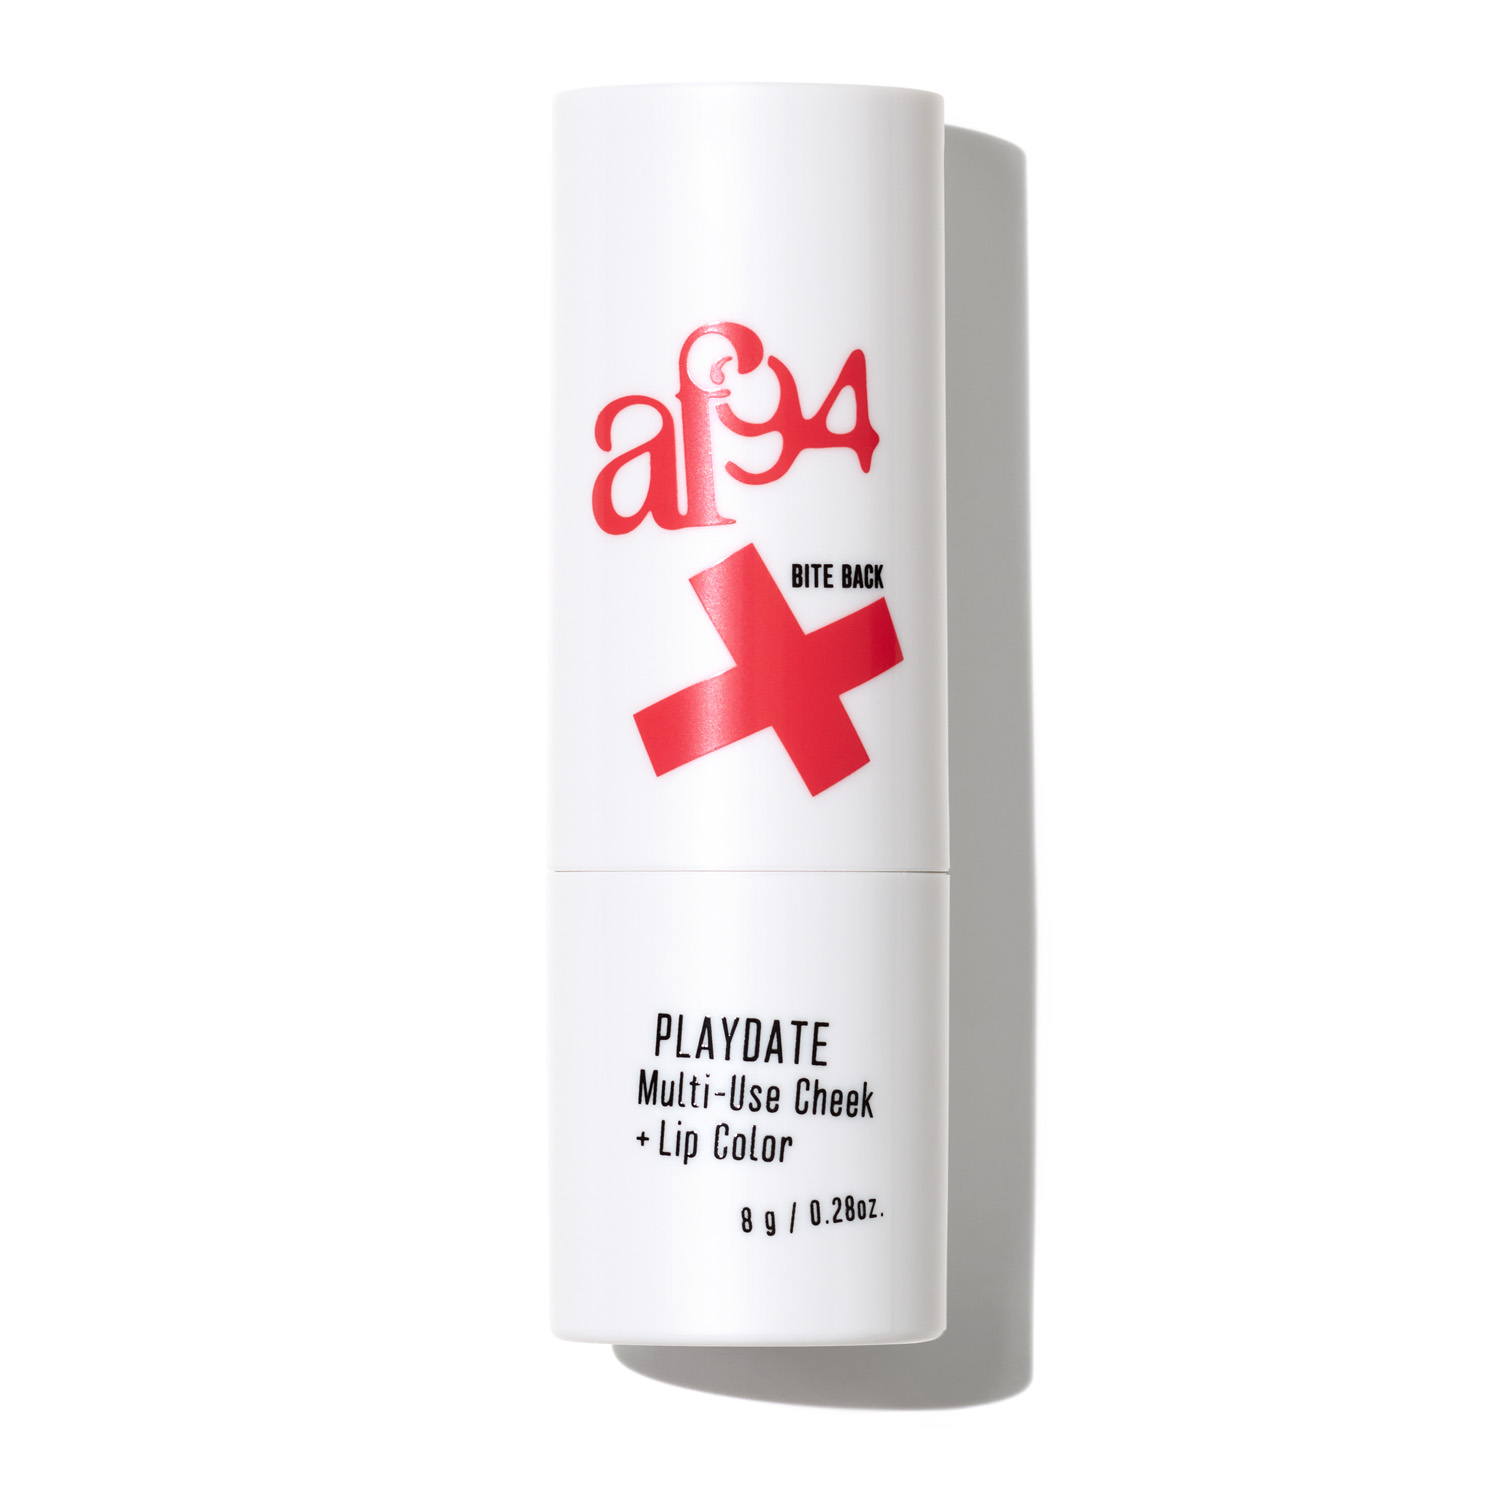 af94 Playdate Multi Use Lip and Cheek Tint, Bite Back, Red - image 2 of 6